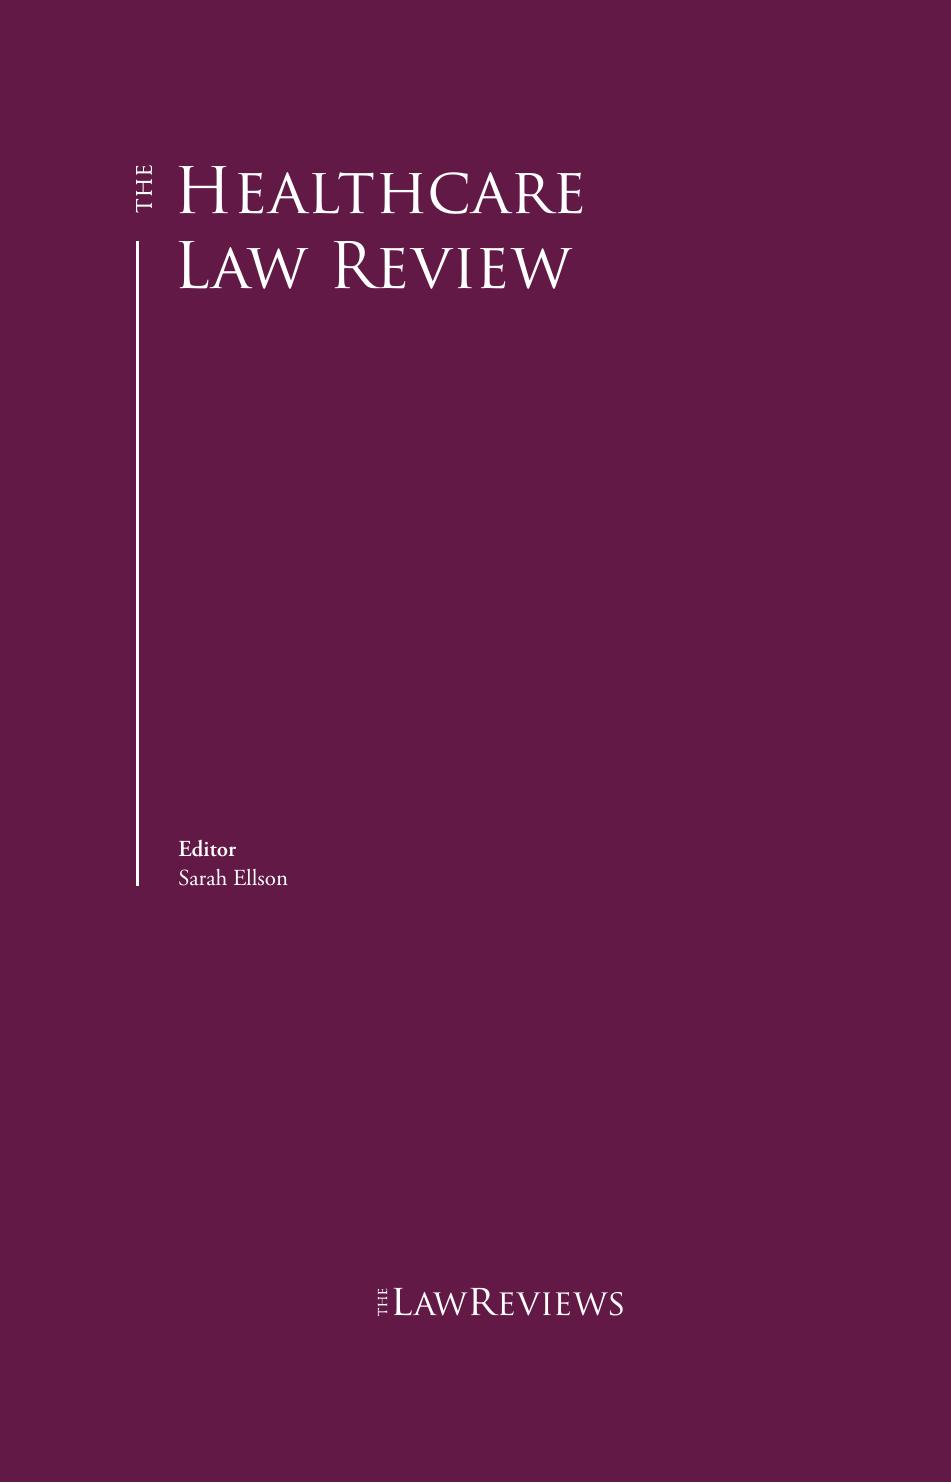 HEALTHCARE LAW REVIEW 2017.pdf